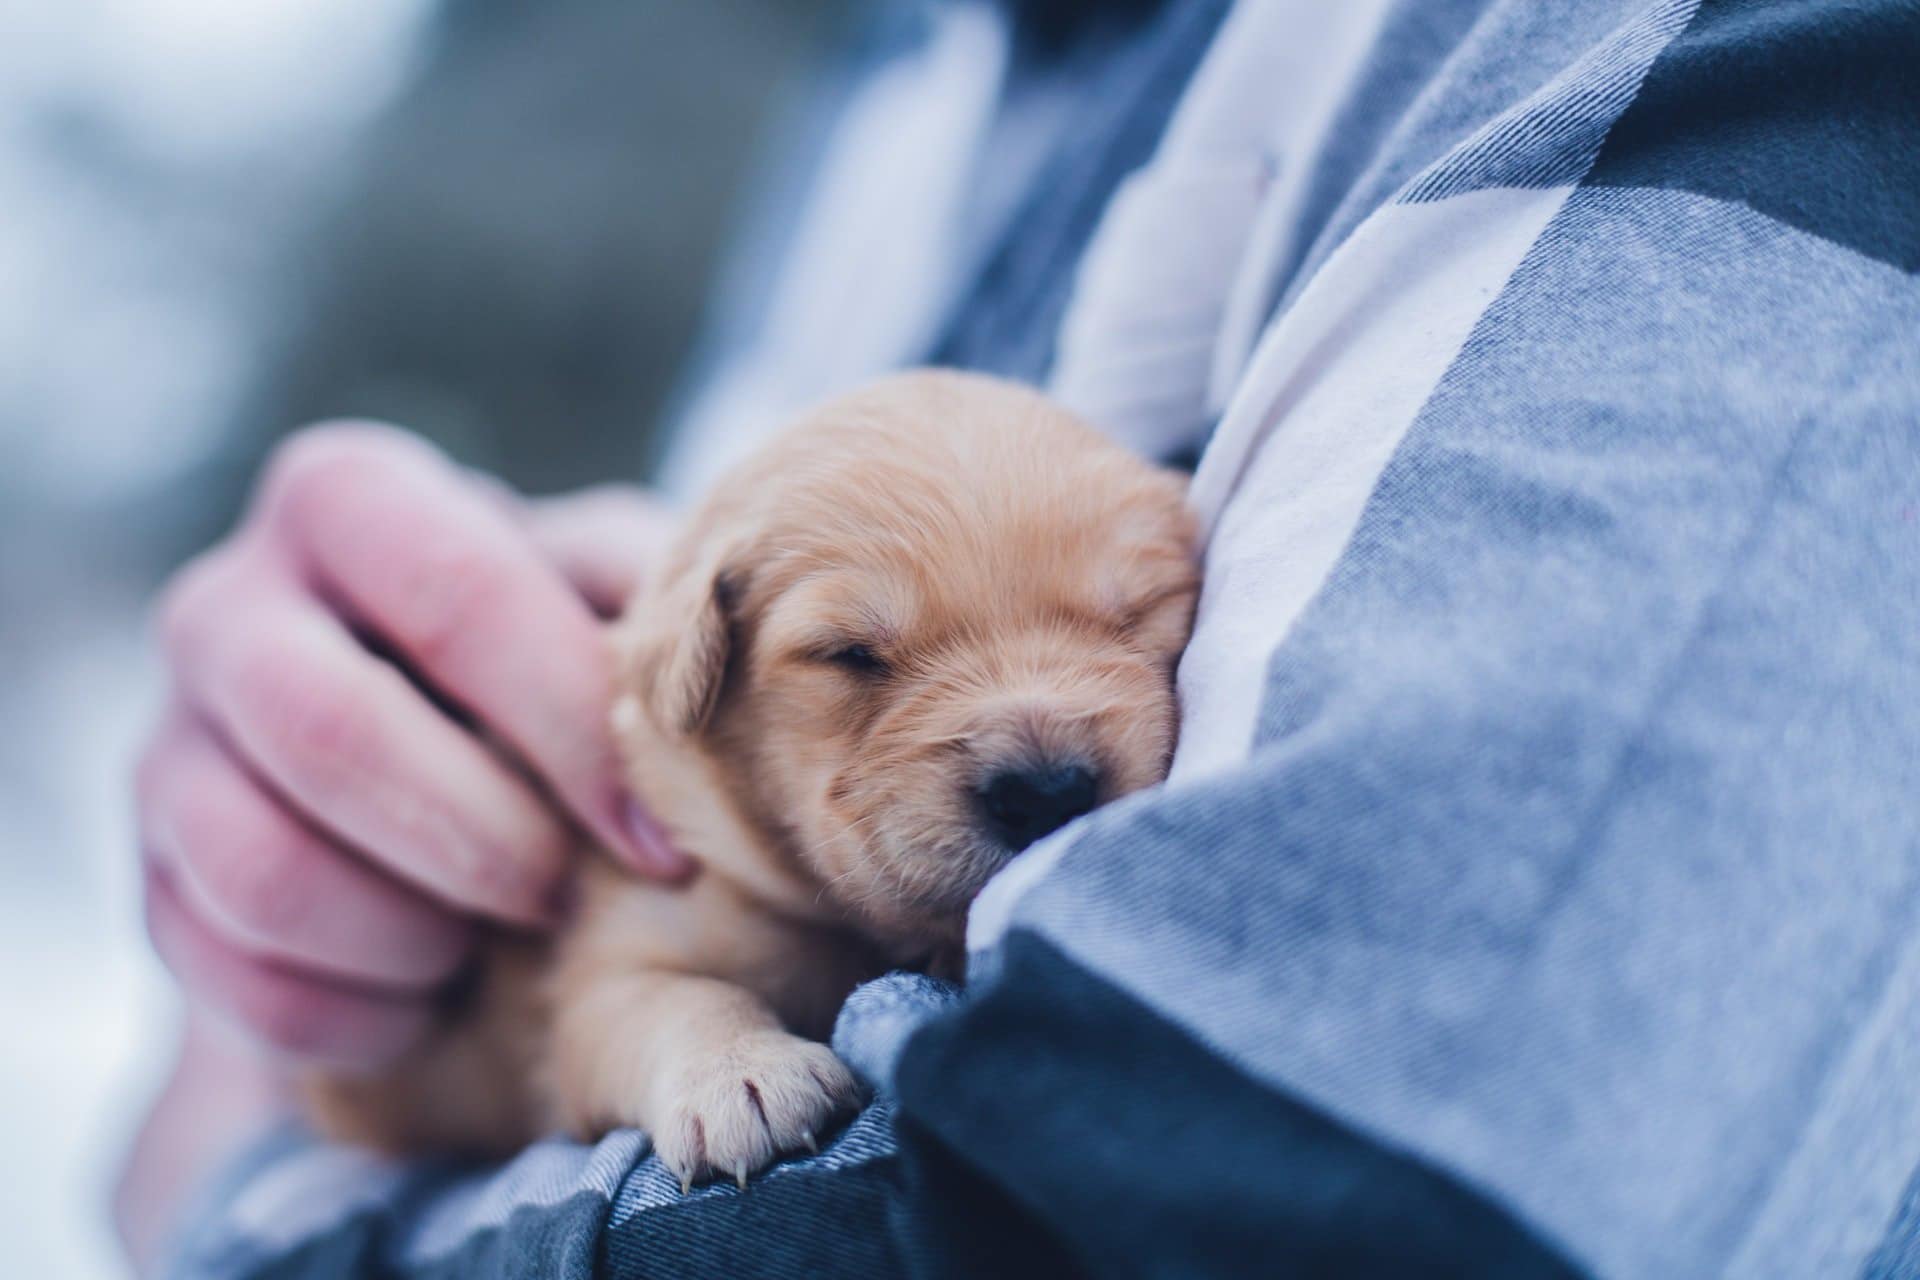 Puppies: 21 Crucial Facts To Know Before Getting One